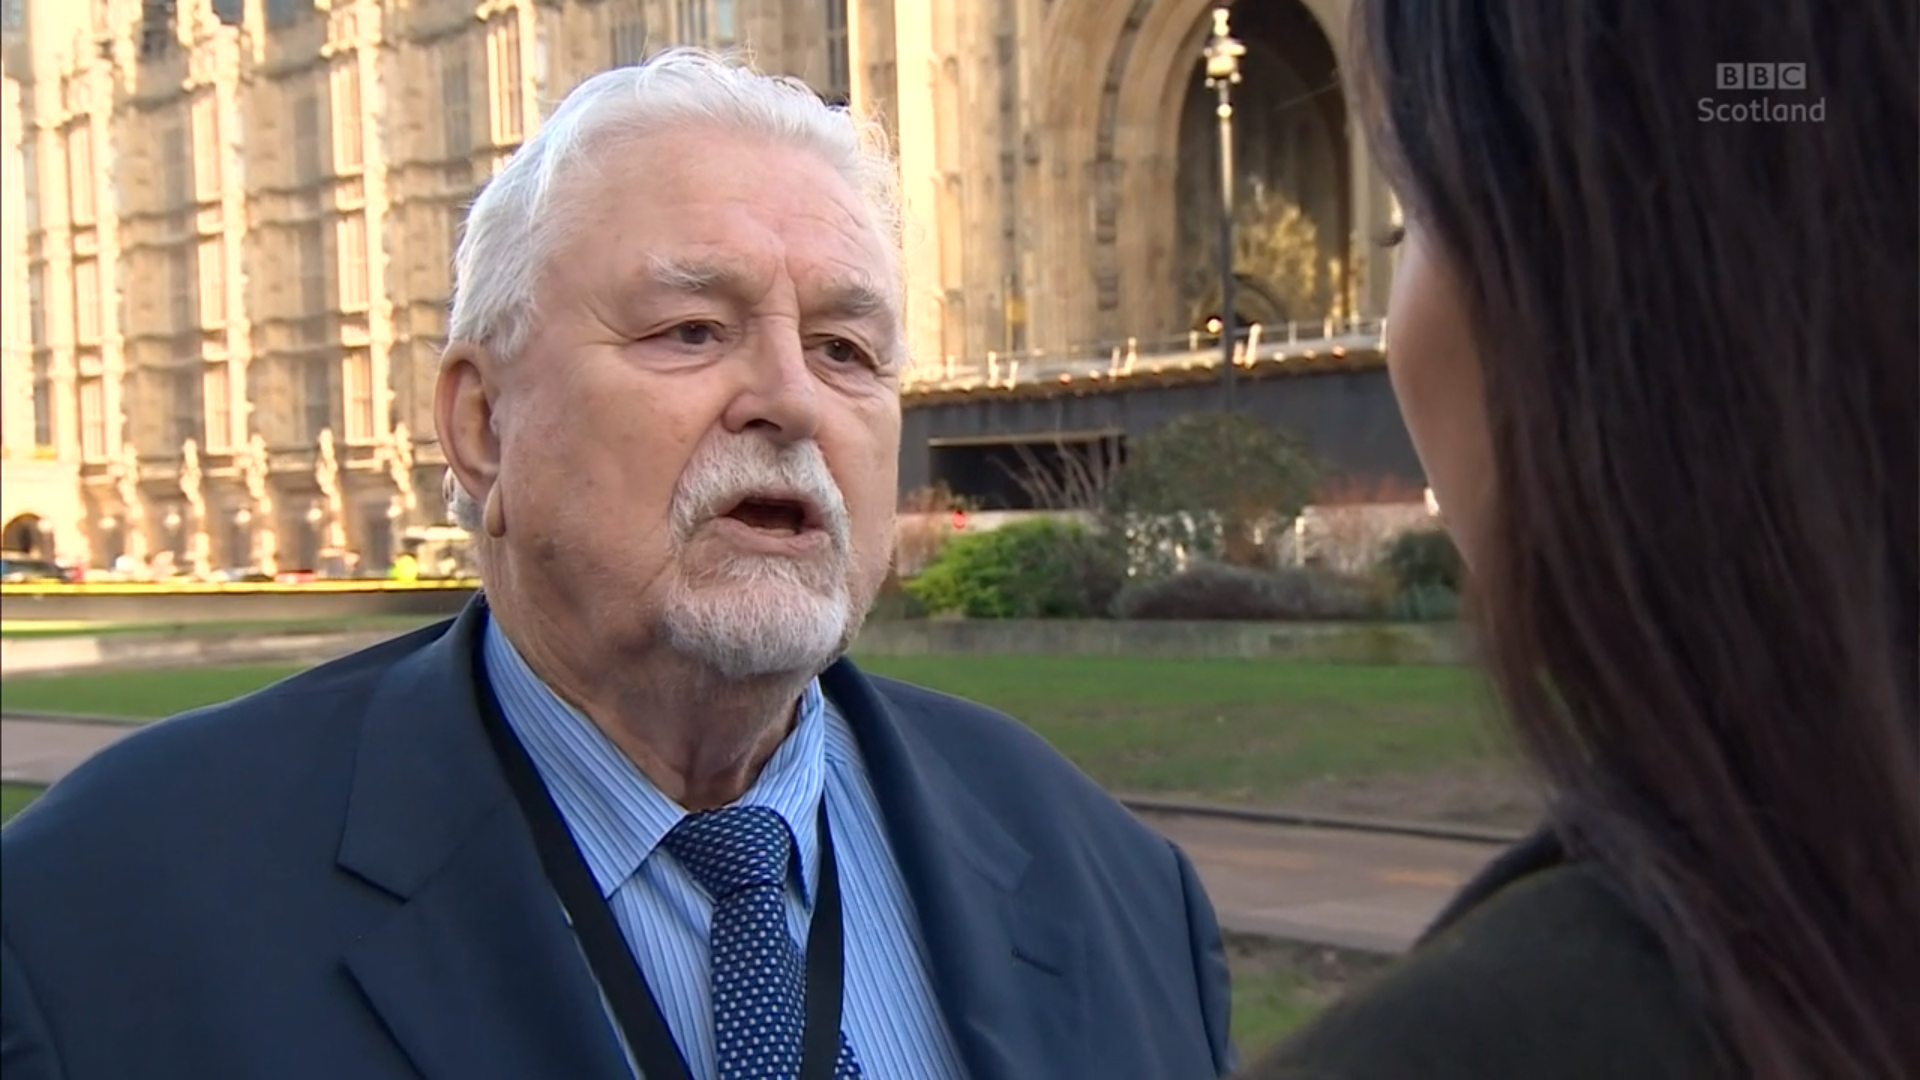 Lord Maginnis has been suspended from the House of Lords